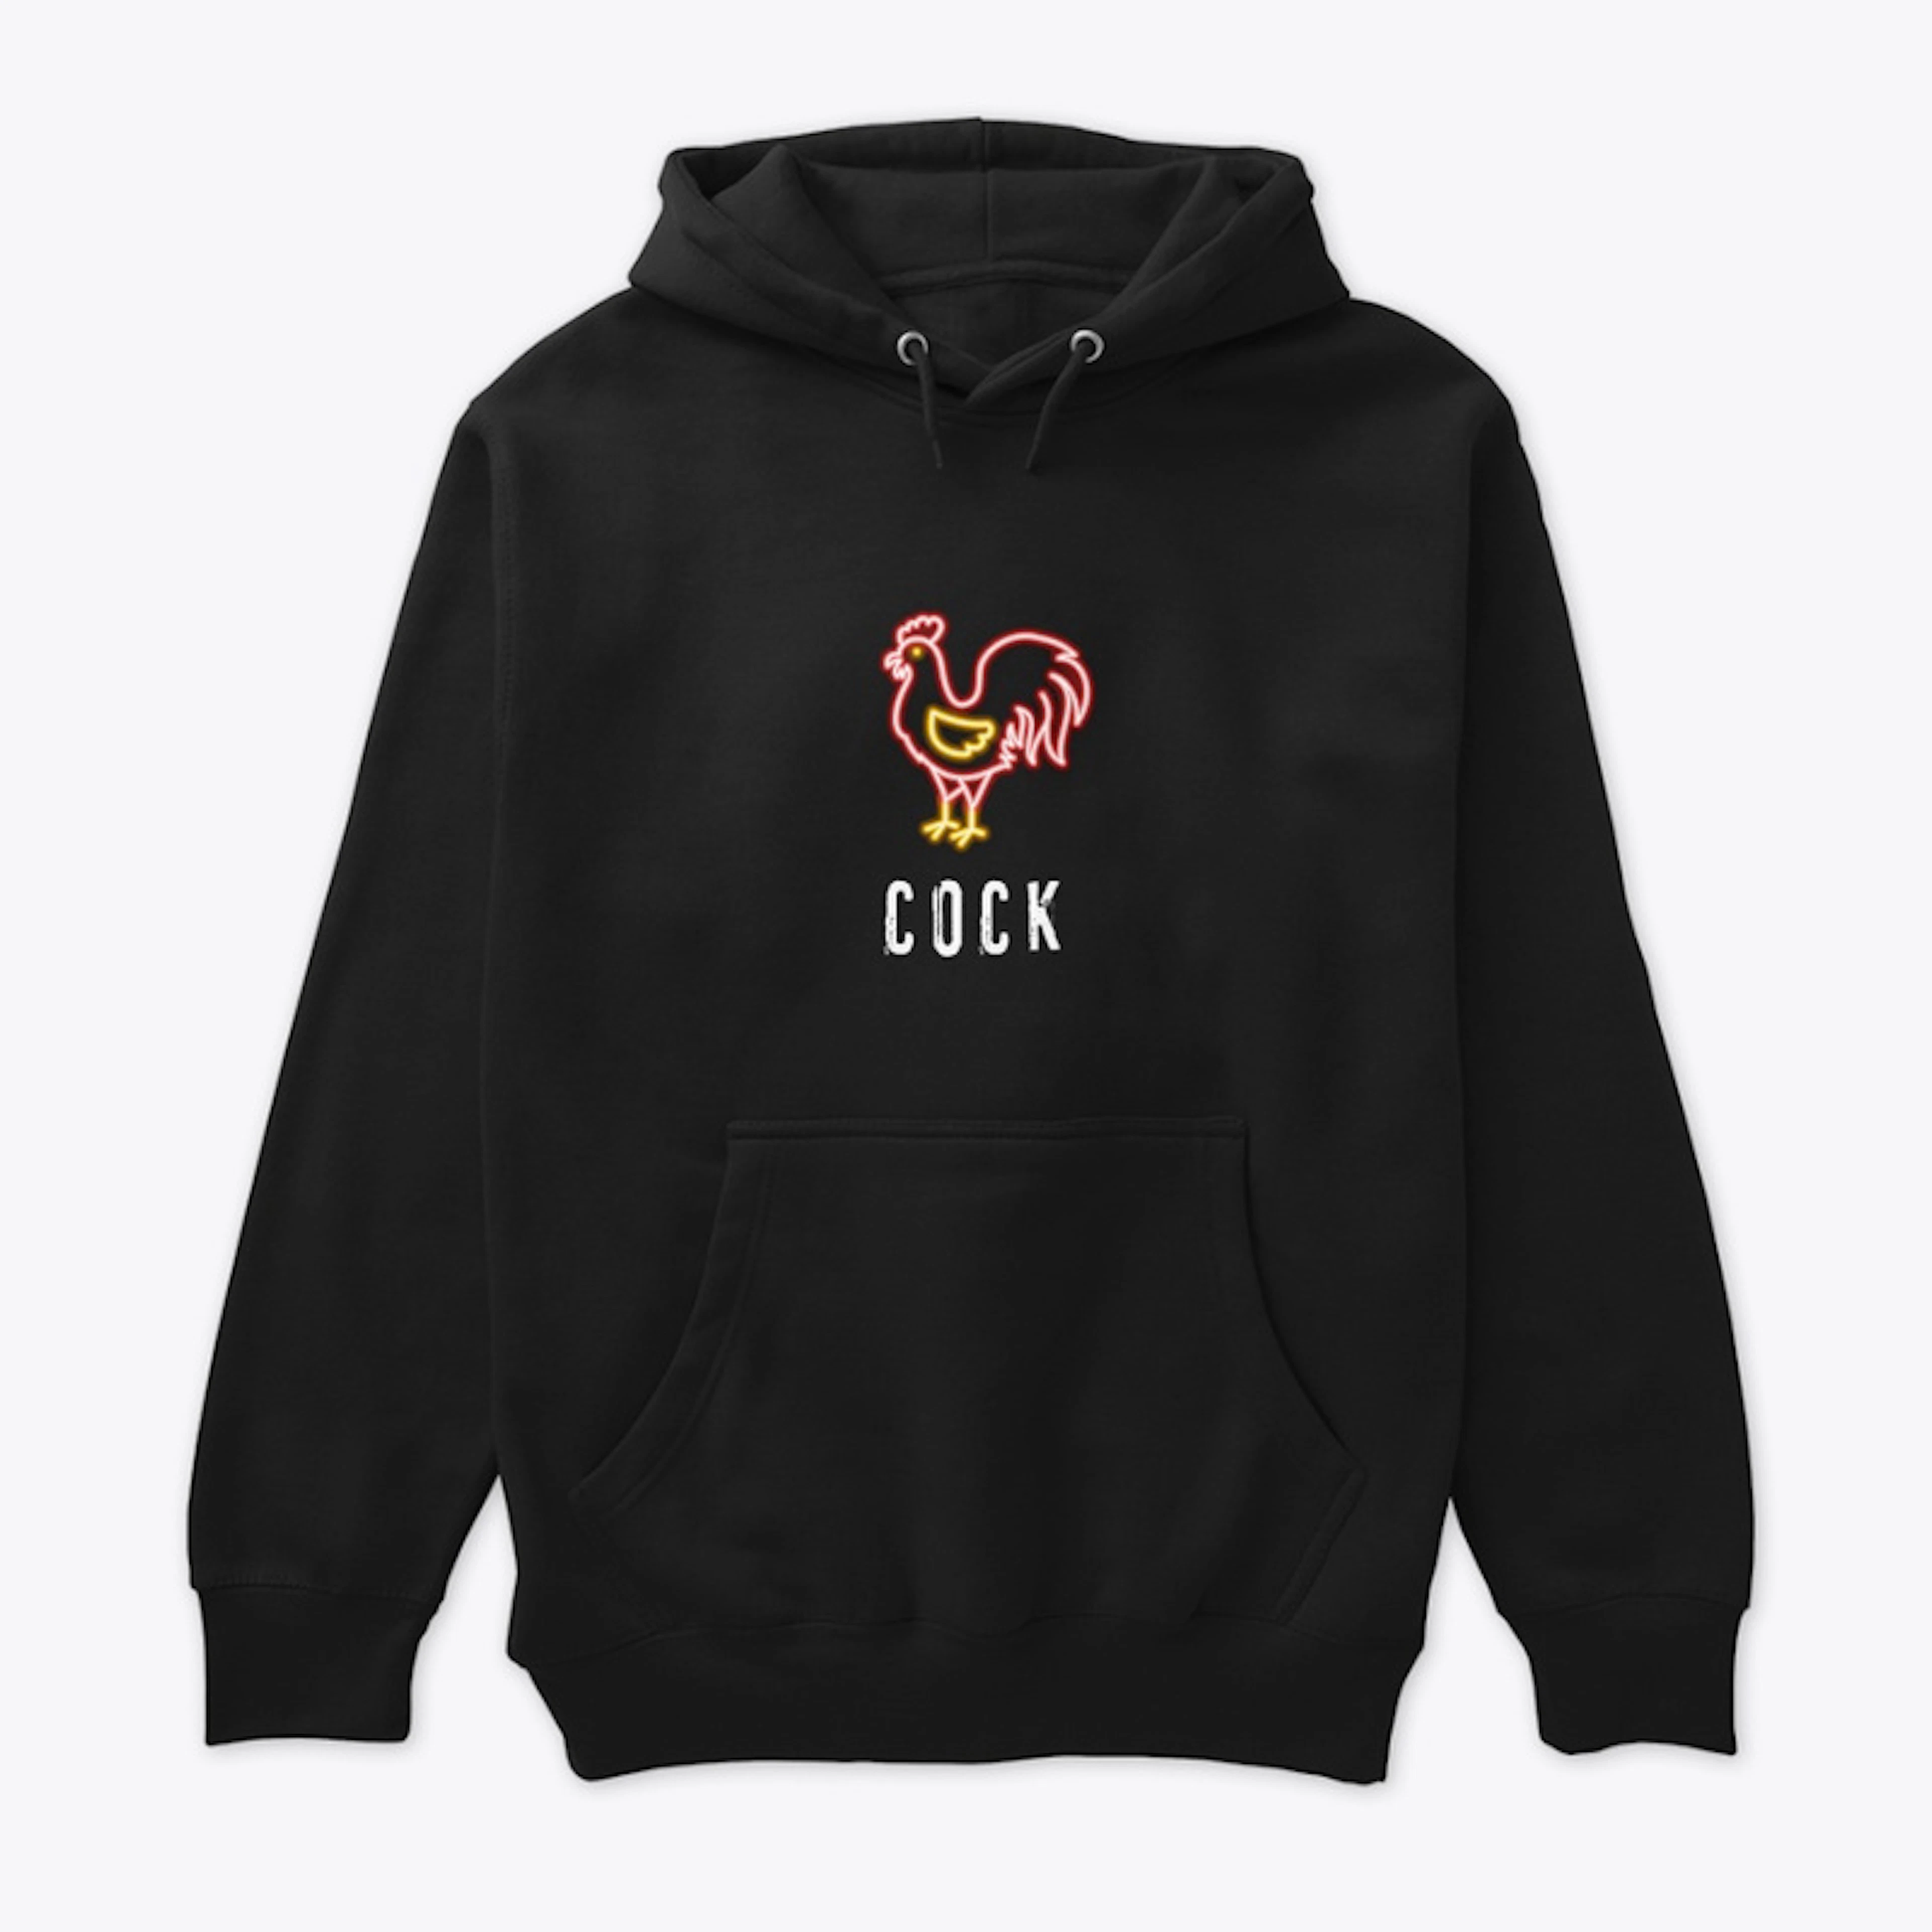 Cock rooster